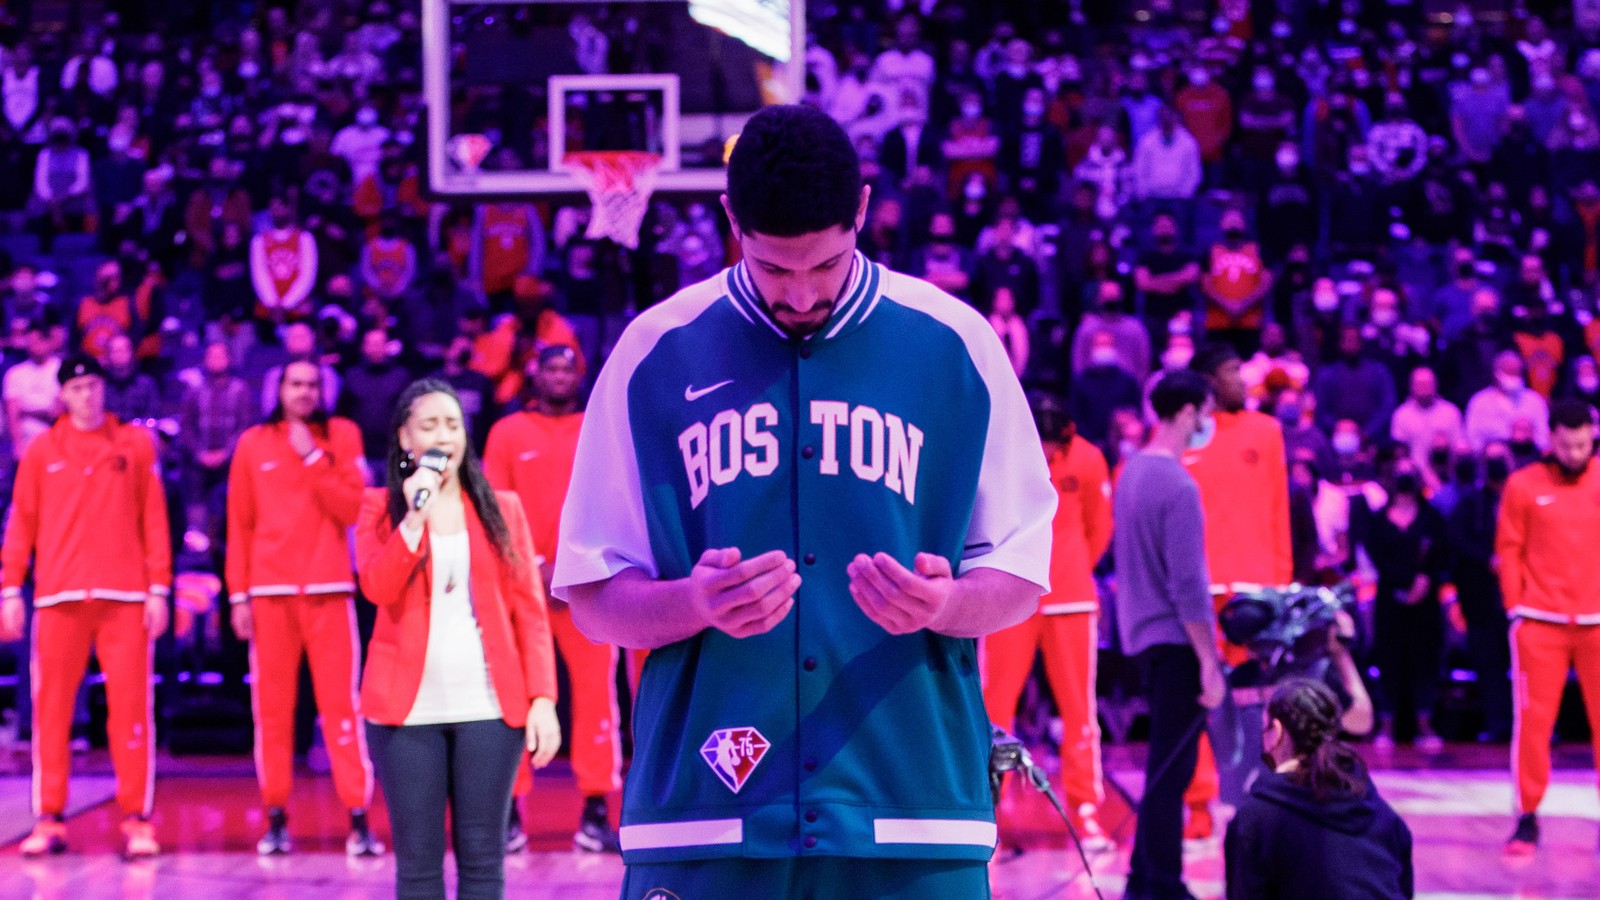 What Happened to Enes Kanter? Where is Enes Kanter Now? - News